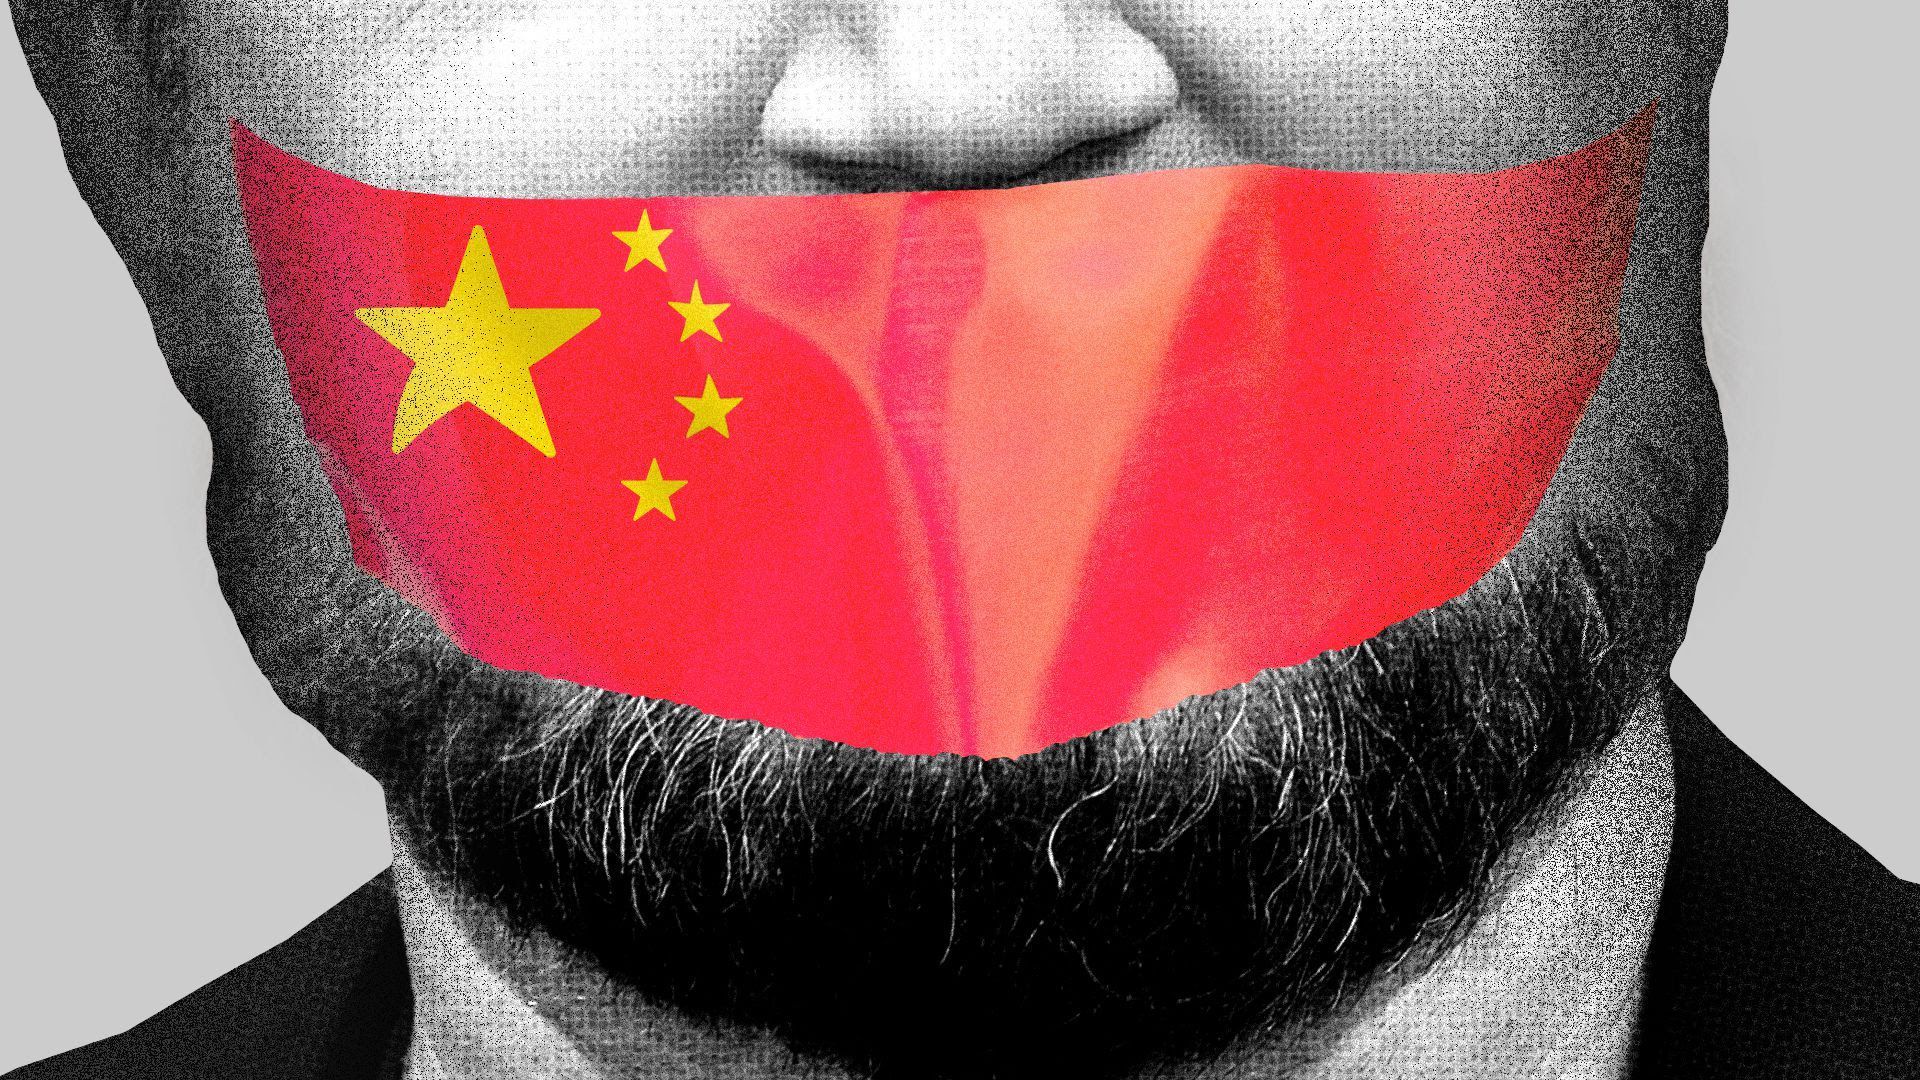 Illustration of a person whose mouth is covered in a mask made by the Chinese flag